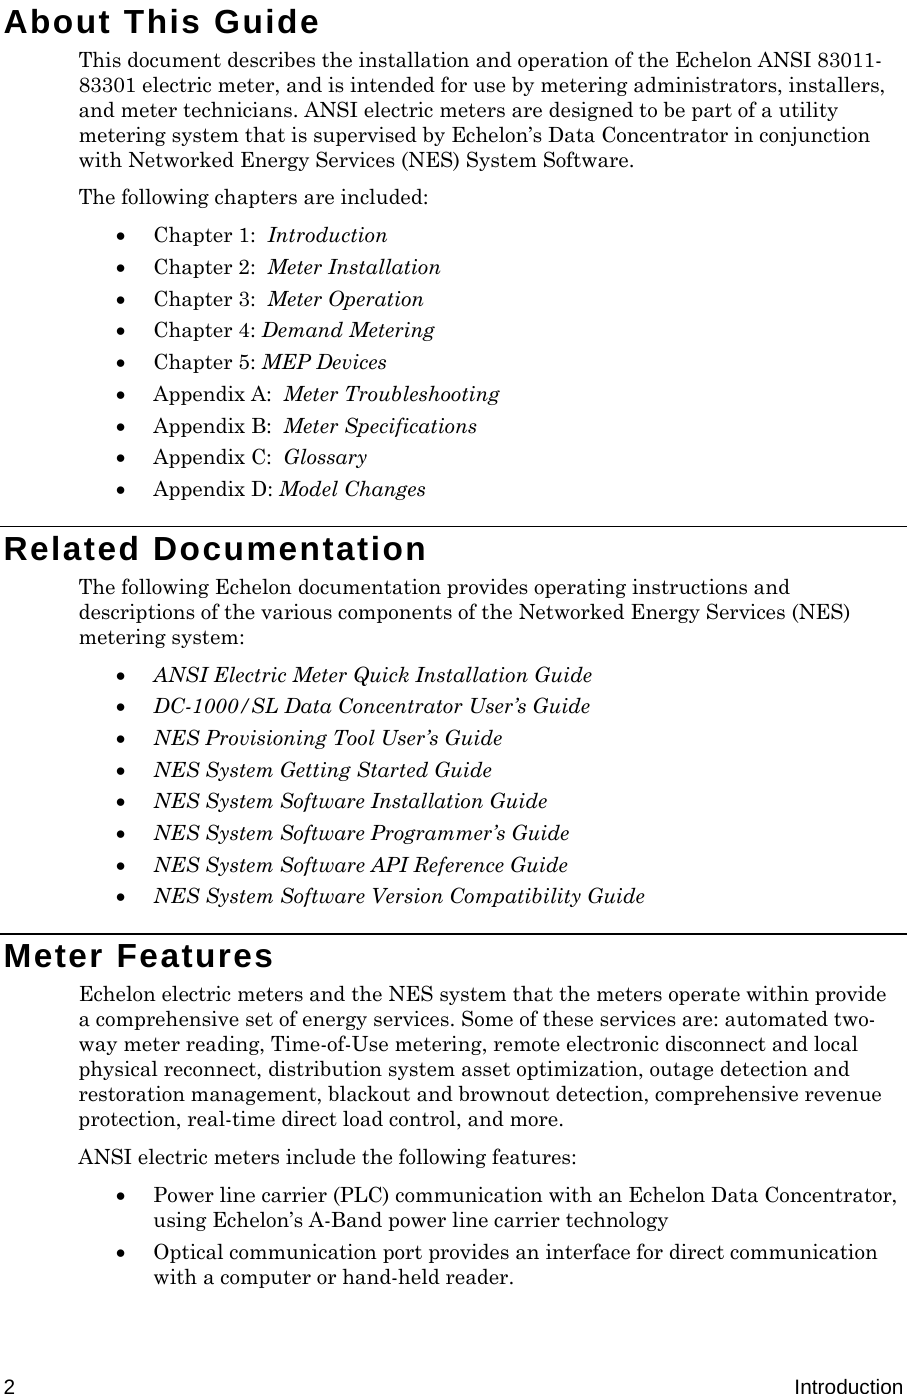  2  Introduction About This Guide This document describes the installation and operation of the Echelon ANSI 83011-83301 electric meter, and is intended for use by metering administrators, installers, and meter technicians. ANSI electric meters are designed to be part of a utility metering system that is supervised by Echelon’s Data Concentrator in conjunction with Networked Energy Services (NES) System Software.  The following chapters are included:  Chapter 1:  Introduction  Chapter 2:  Meter Installation  Chapter 3:  Meter Operation  Chapter 4: Demand Metering  Chapter 5: MEP Devices  Appendix A:  Meter Troubleshooting  Appendix B:  Meter Specifications  Appendix C:  Glossary  Appendix D: Model Changes Related Documentation The following Echelon documentation provides operating instructions and descriptions of the various components of the Networked Energy Services (NES) metering system:  ANSI Electric Meter Quick Installation Guide  DC-1000/SL Data Concentrator User’s Guide   NES Provisioning Tool User’s Guide   NES System Getting Started Guide  NES System Software Installation Guide  NES System Software Programmer’s Guide  NES System Software API Reference Guide   NES System Software Version Compatibility Guide Meter Features Echelon electric meters and the NES system that the meters operate within provide a comprehensive set of energy services. Some of these services are: automated two-way meter reading, Time-of-Use metering, remote electronic disconnect and local physical reconnect, distribution system asset optimization, outage detection and restoration management, blackout and brownout detection, comprehensive revenue protection, real-time direct load control, and more. ANSI electric meters include the following features:   Power line carrier (PLC) communication with an Echelon Data Concentrator, using Echelon’s A-Band power line carrier technology  Optical communication port provides an interface for direct communication with a computer or hand-held reader. 